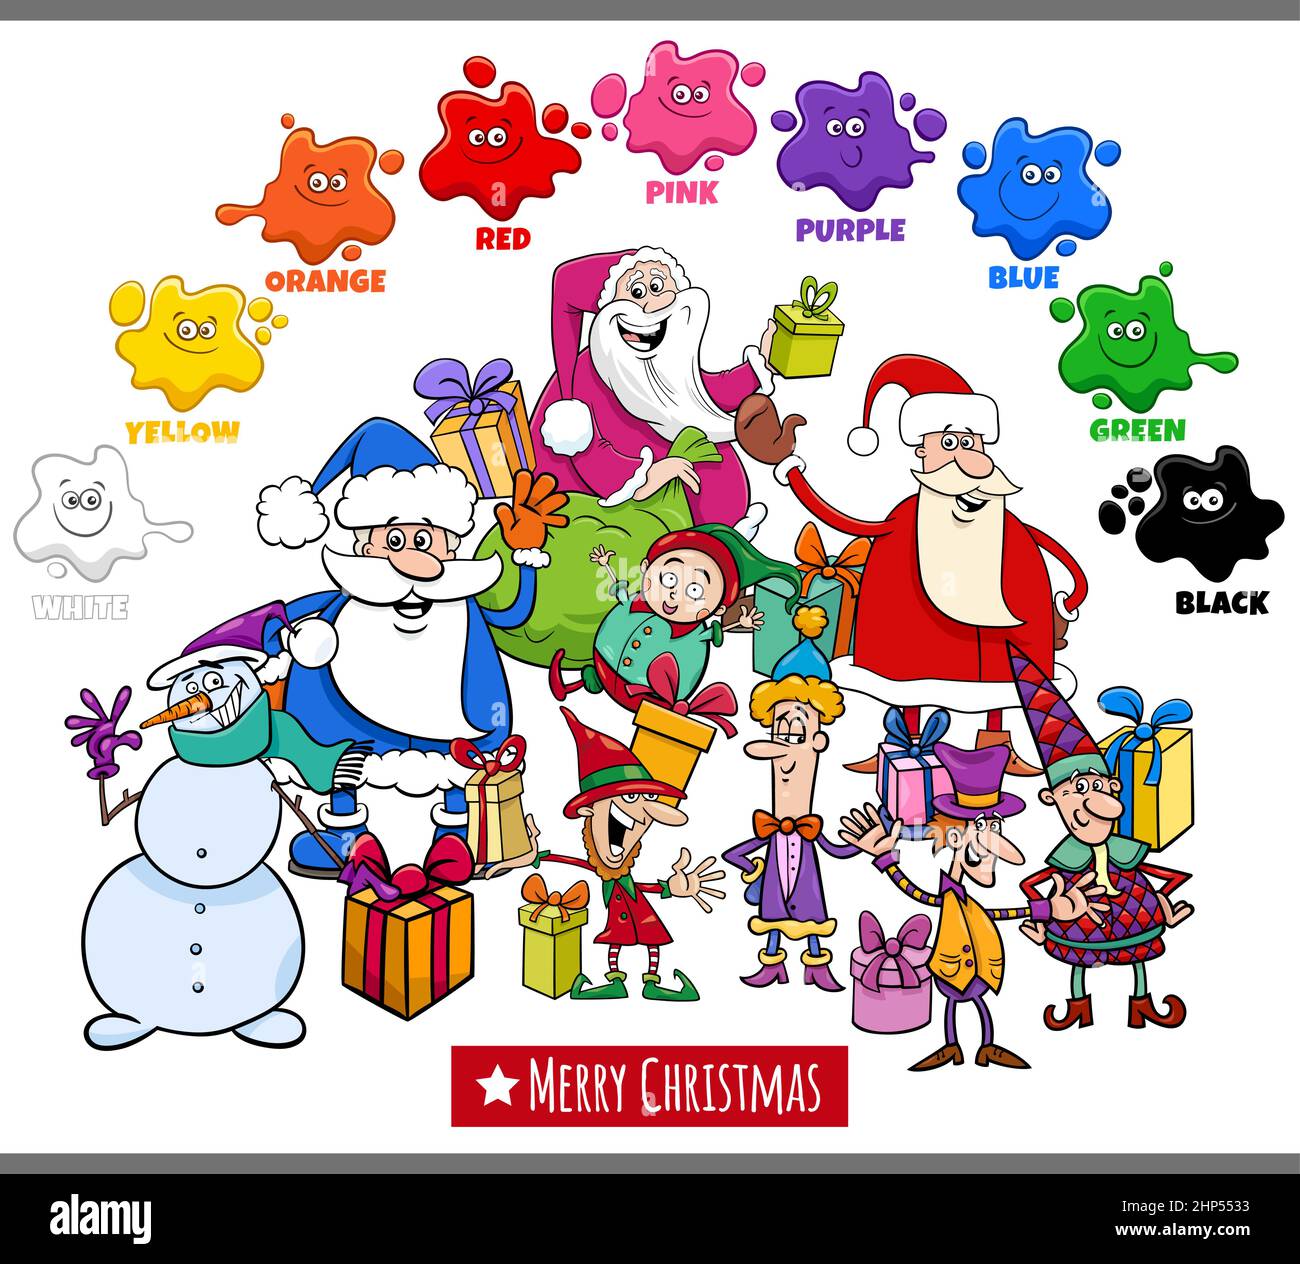 basic-colors-with-christmas-characters-group-stock-vector-image-art